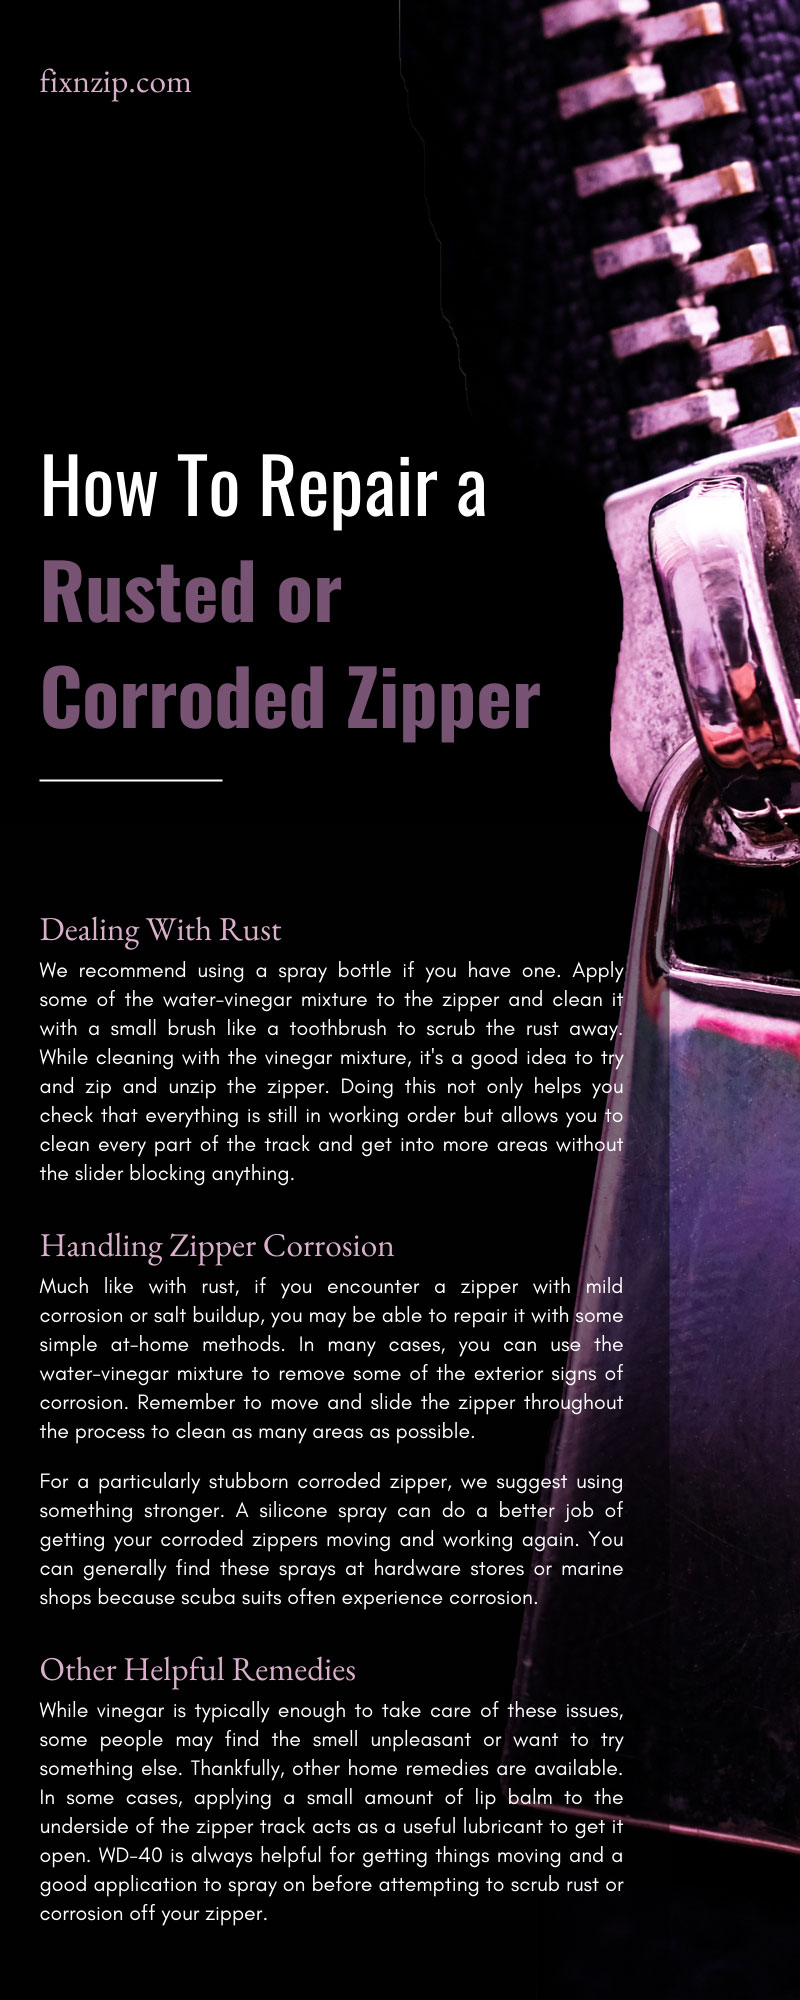 How To Repair a Rusted or Corroded Zipper
